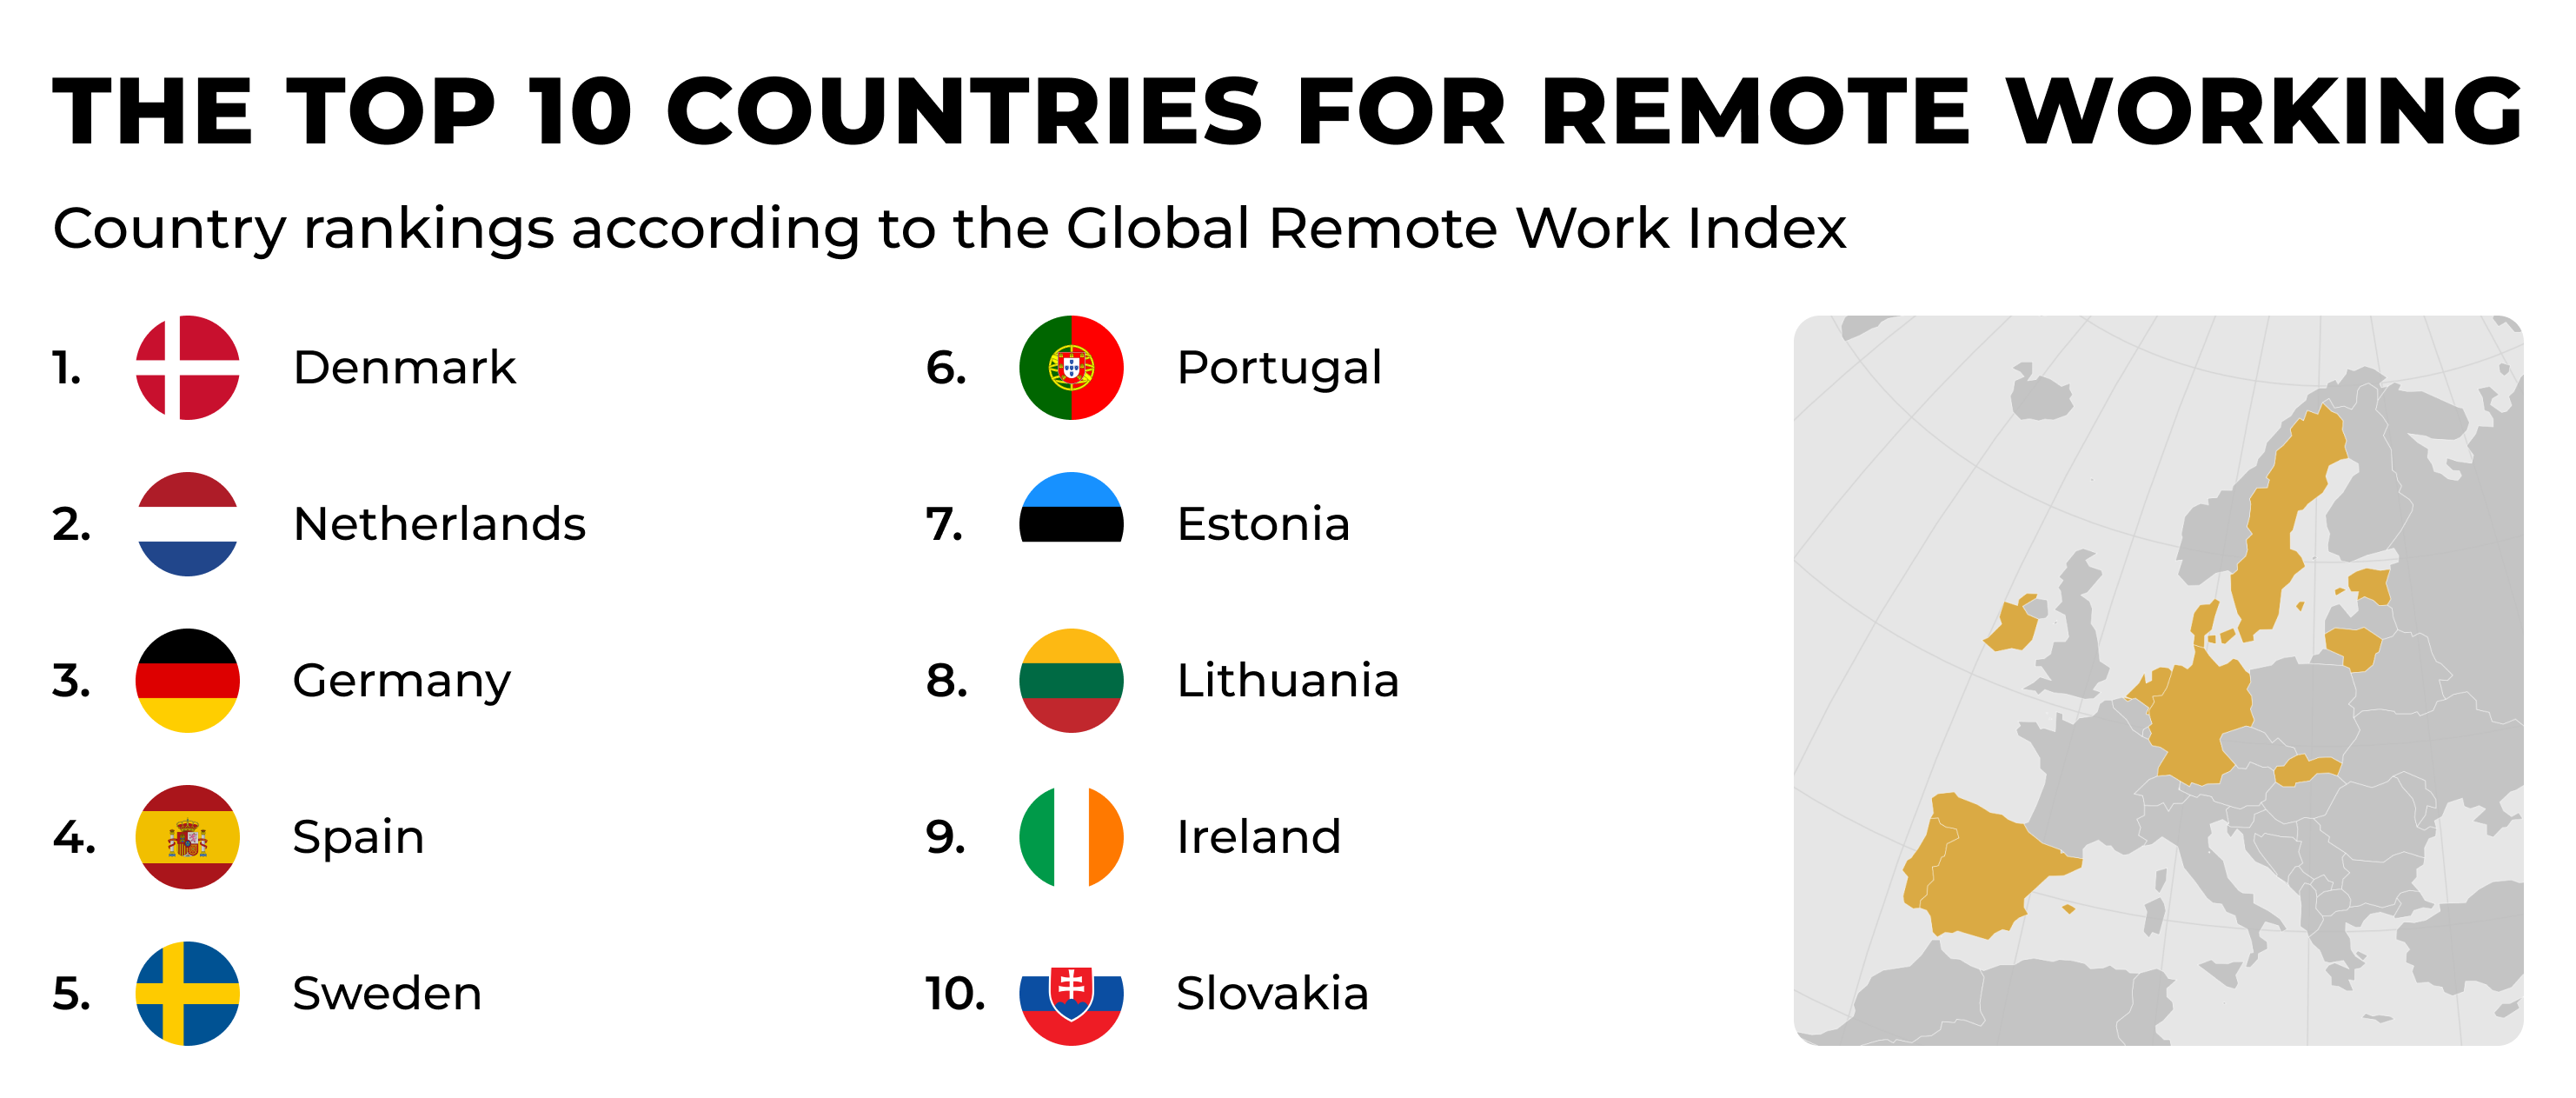 The Best Countries for Remote Working